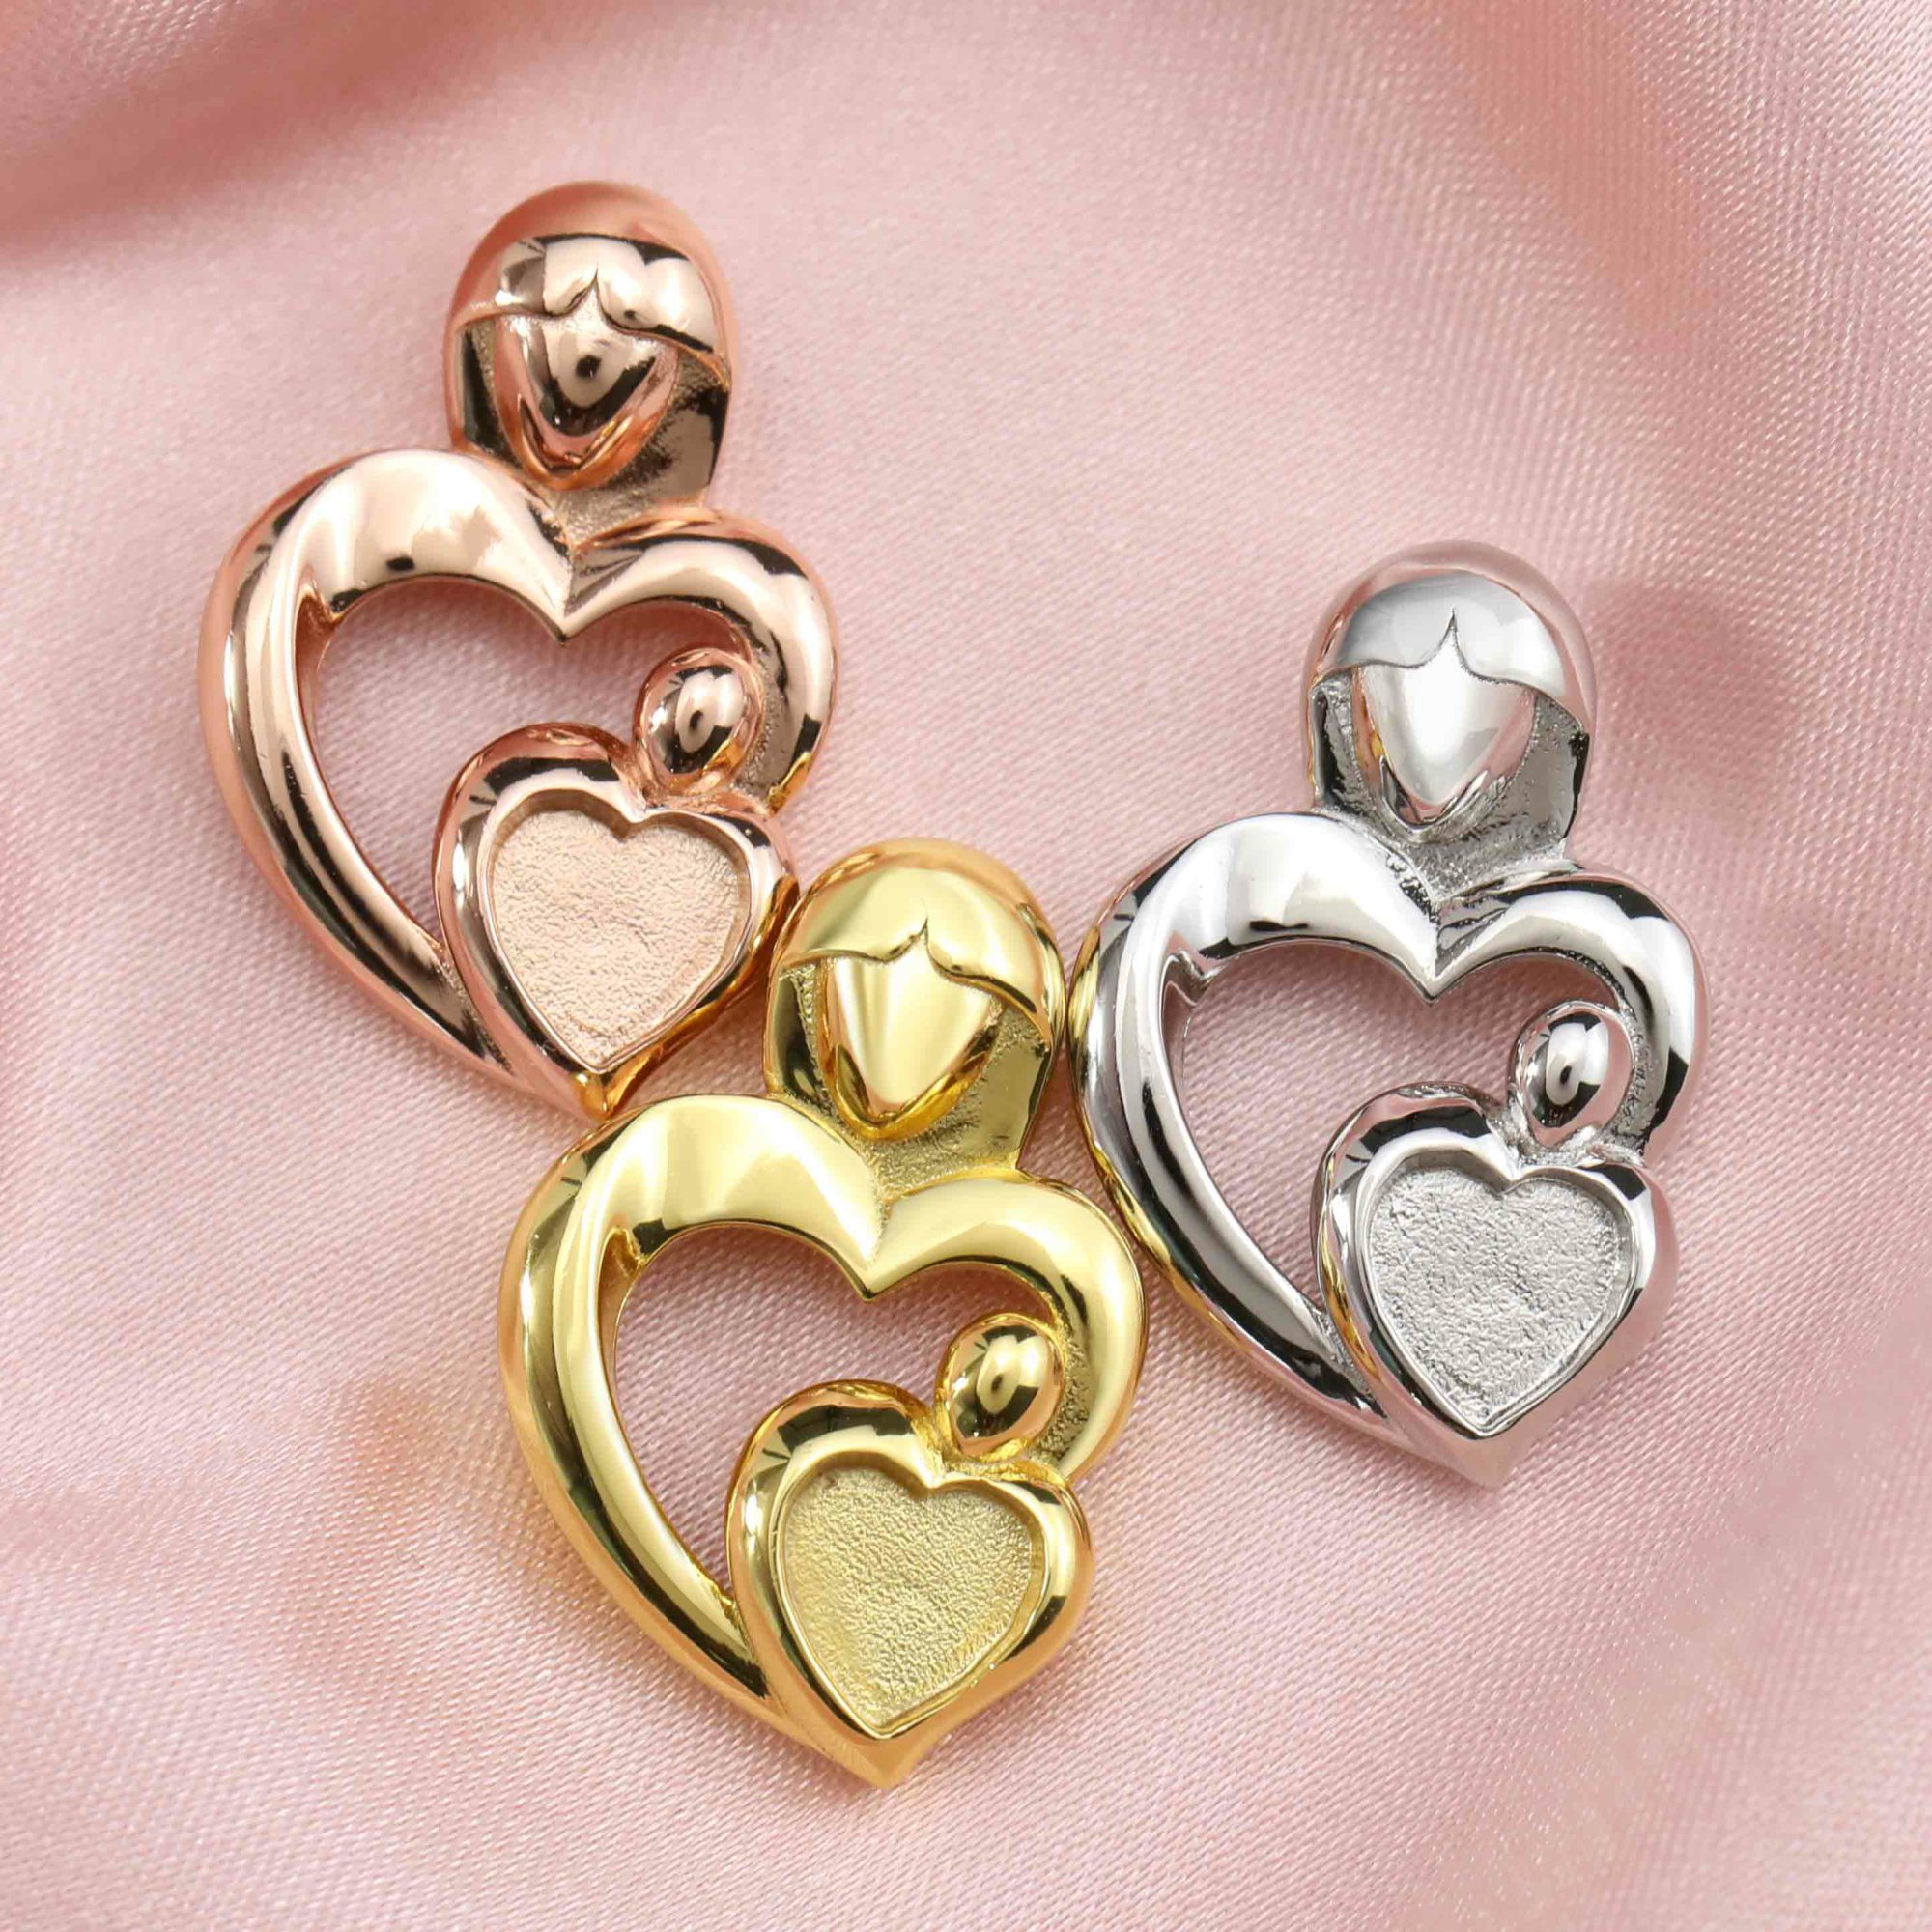 Keepsake Breast Milk Bezel 6MM Heart Pendant Settings Mother Child Solid 14K/18K Gold DIY Memory Jewelry Supplies 1431130-1 - Click Image to Close